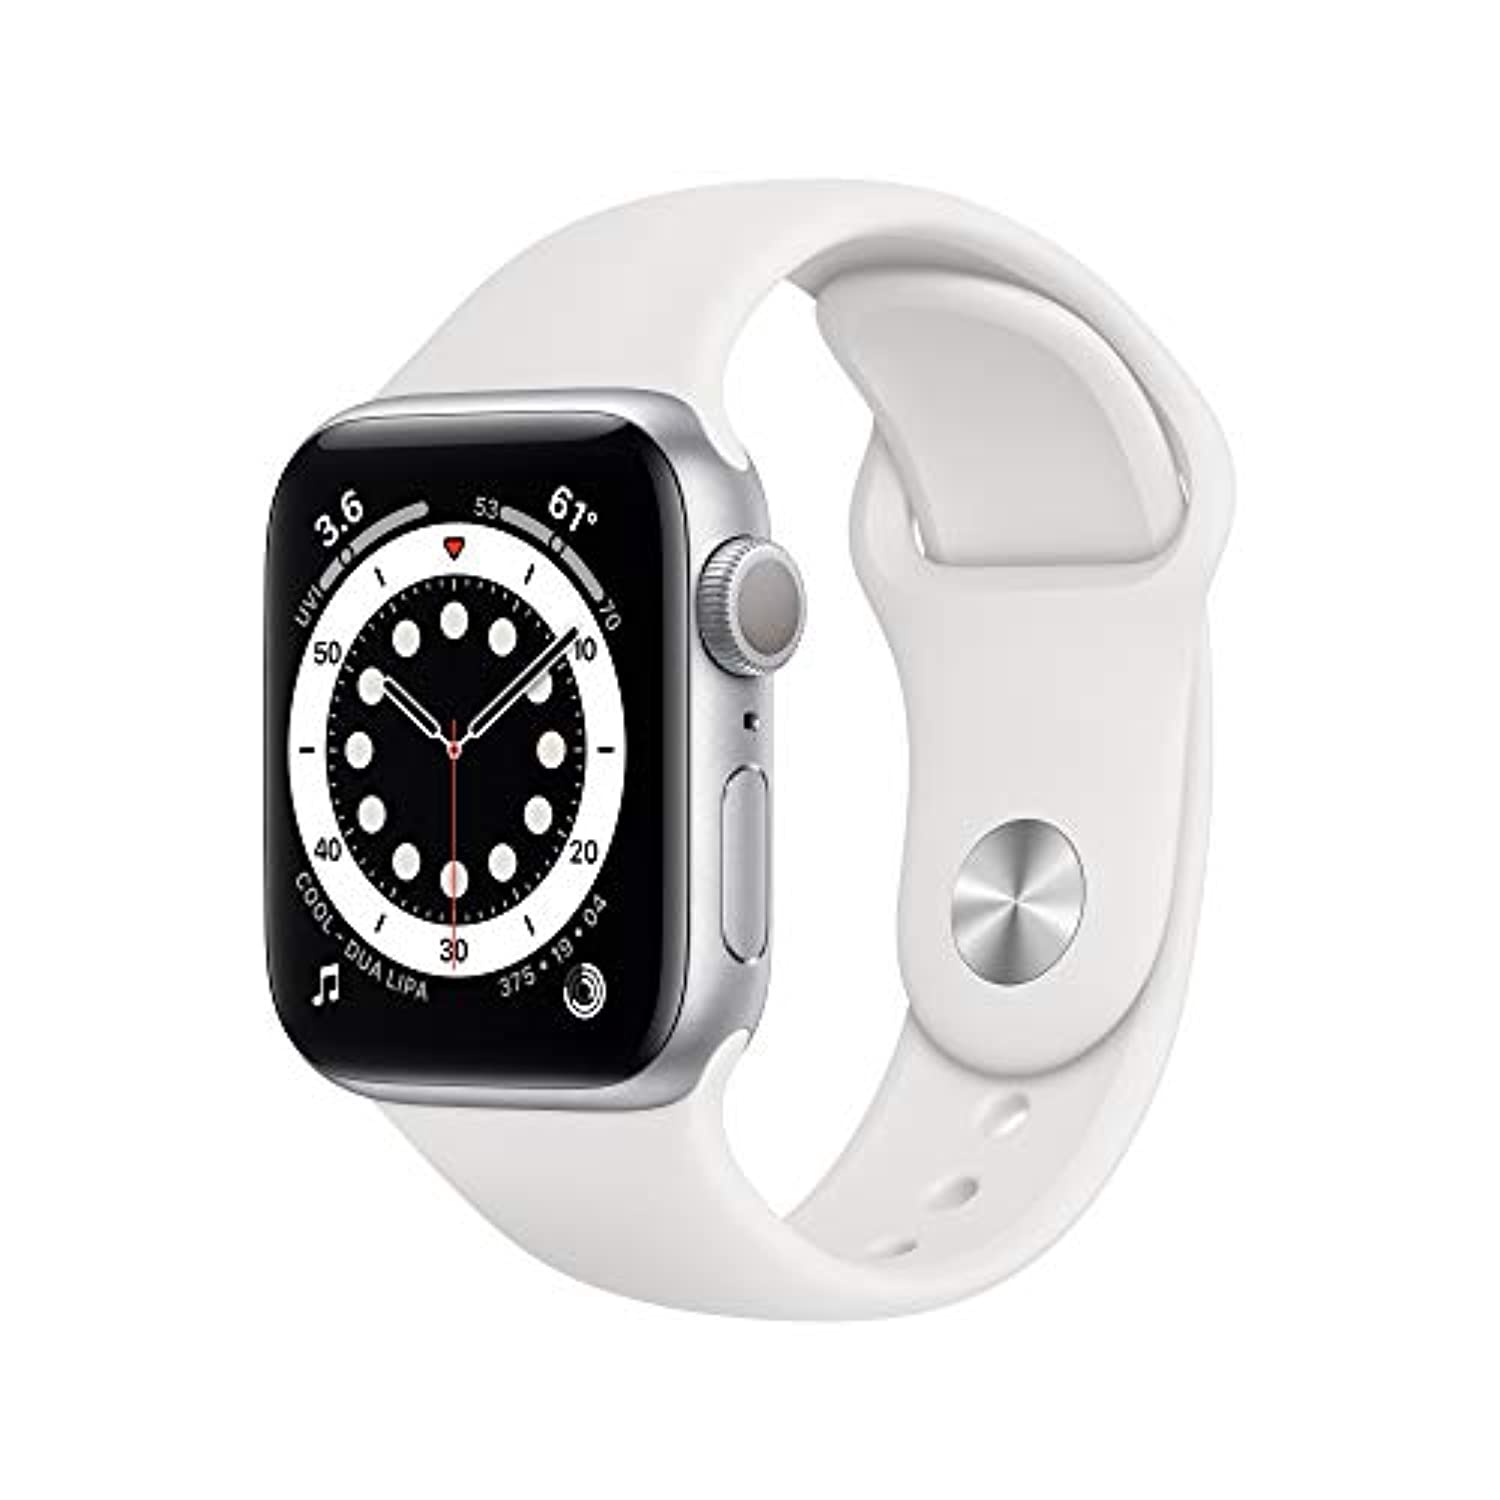 New Apple Watch Series 6 - With Sport Band